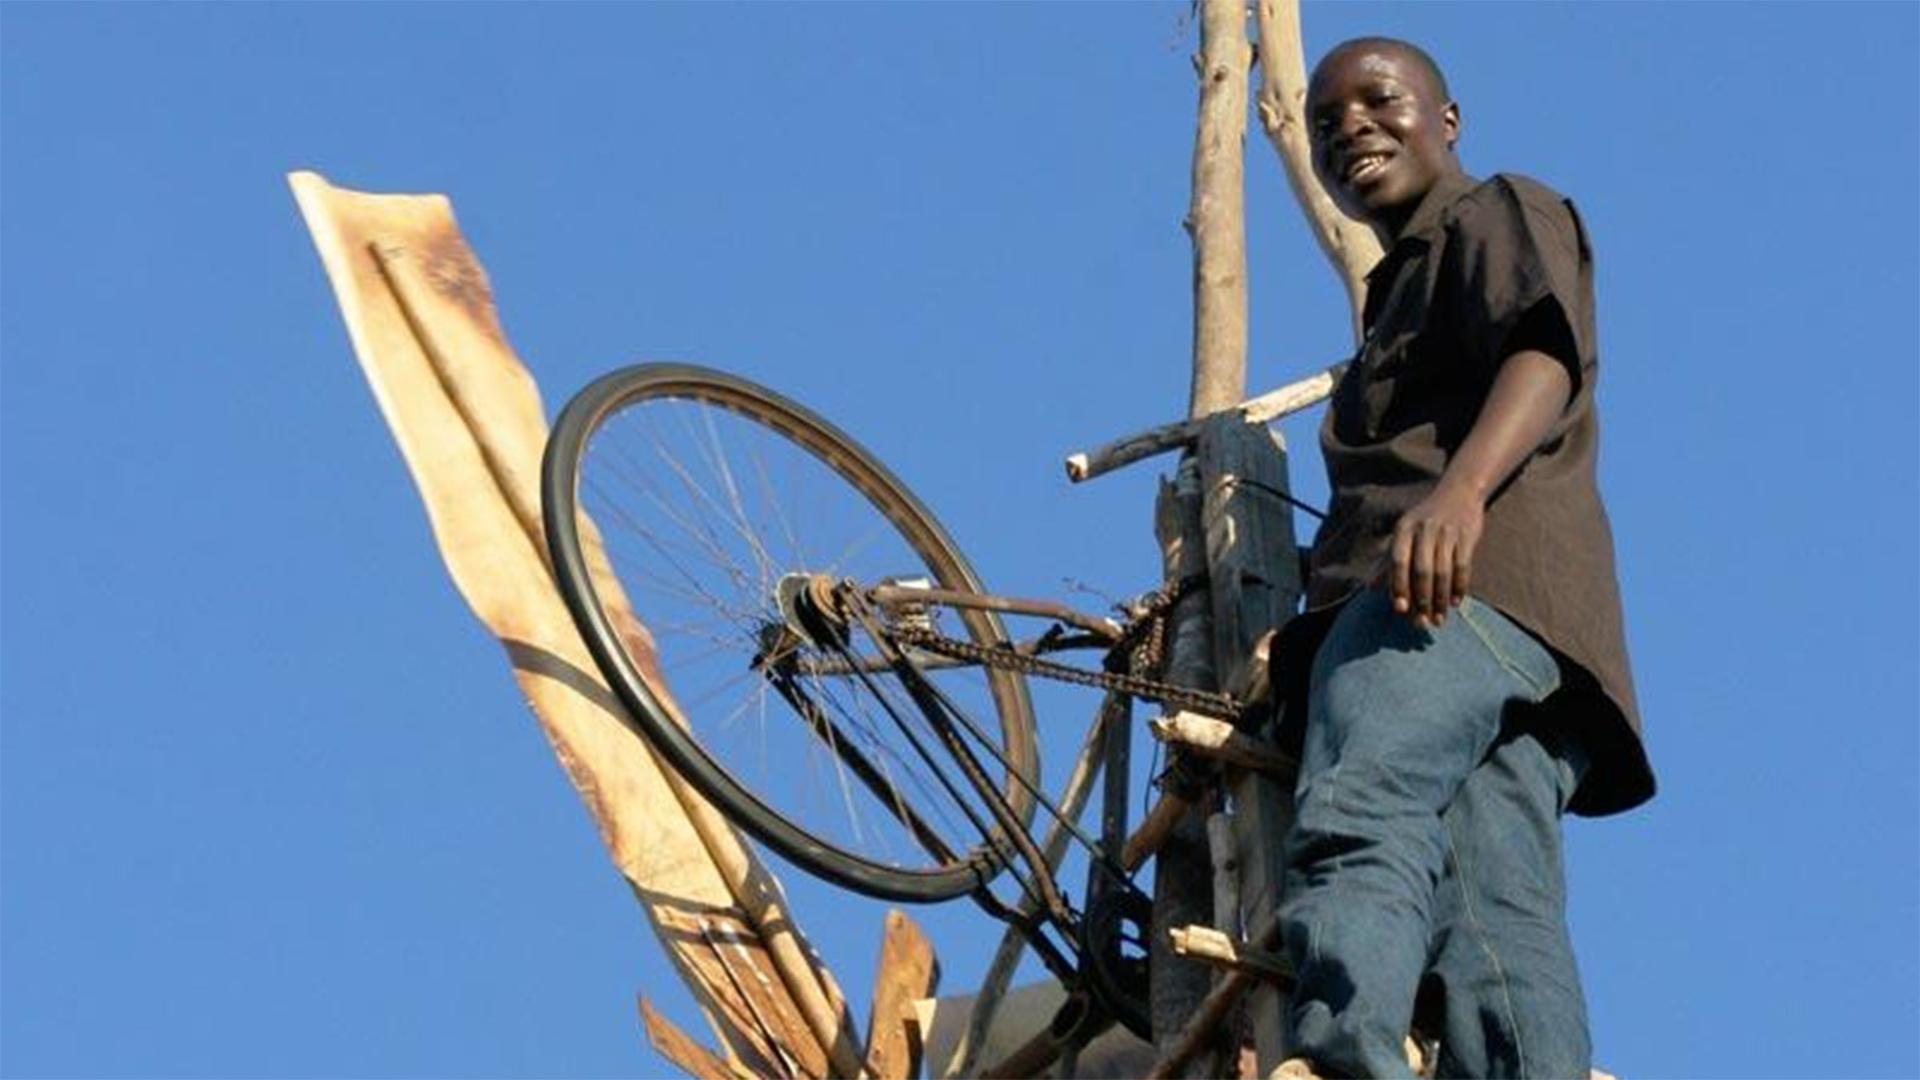 Release Date and for “The Boy Who Harnessed the Wind